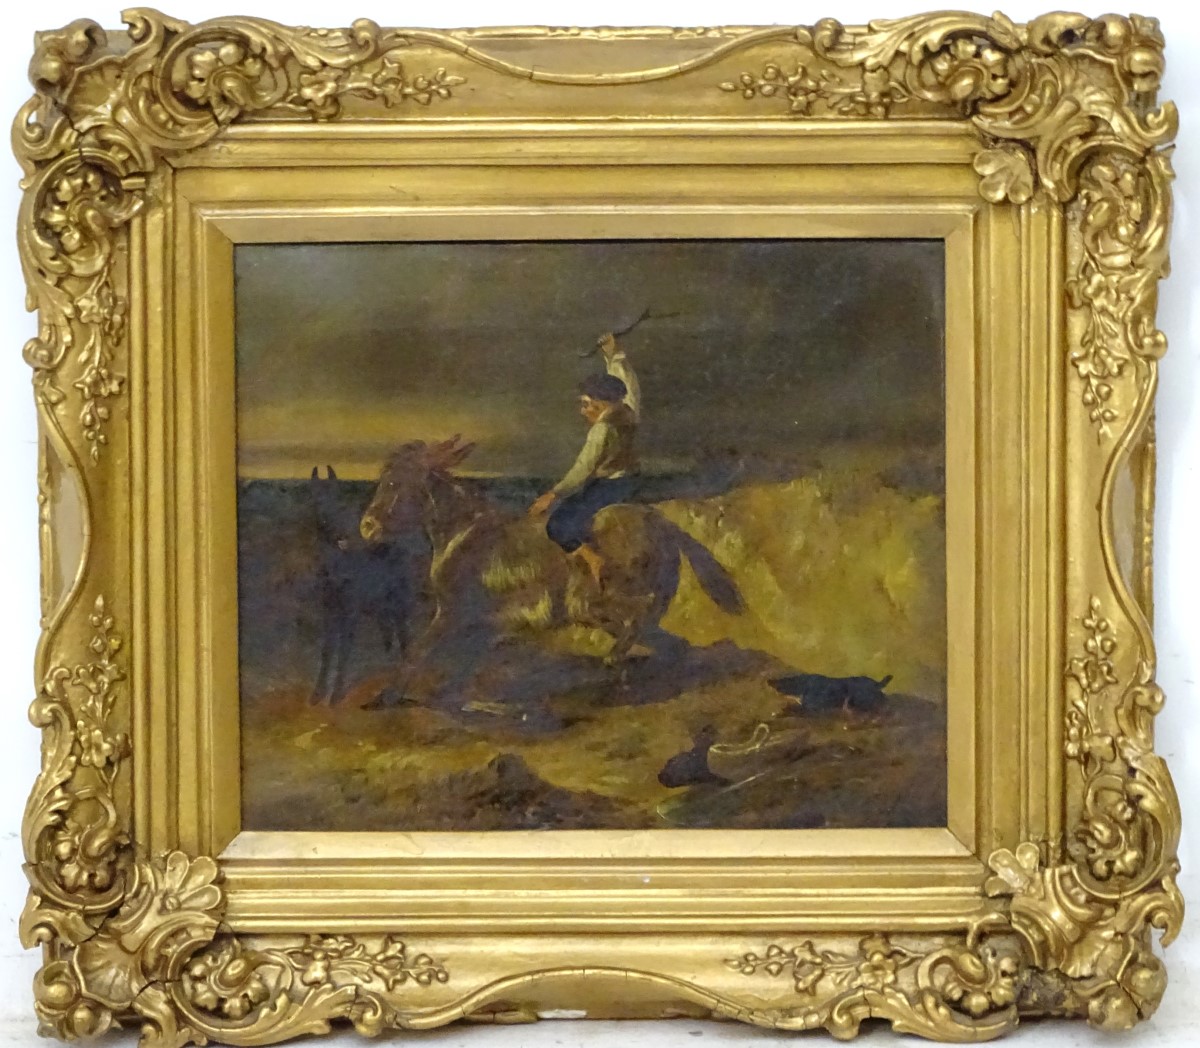 R A Bell (1815-1885) ?, Oil on canvas, The stubborn Donkey, Signed lower left. - Image 4 of 12